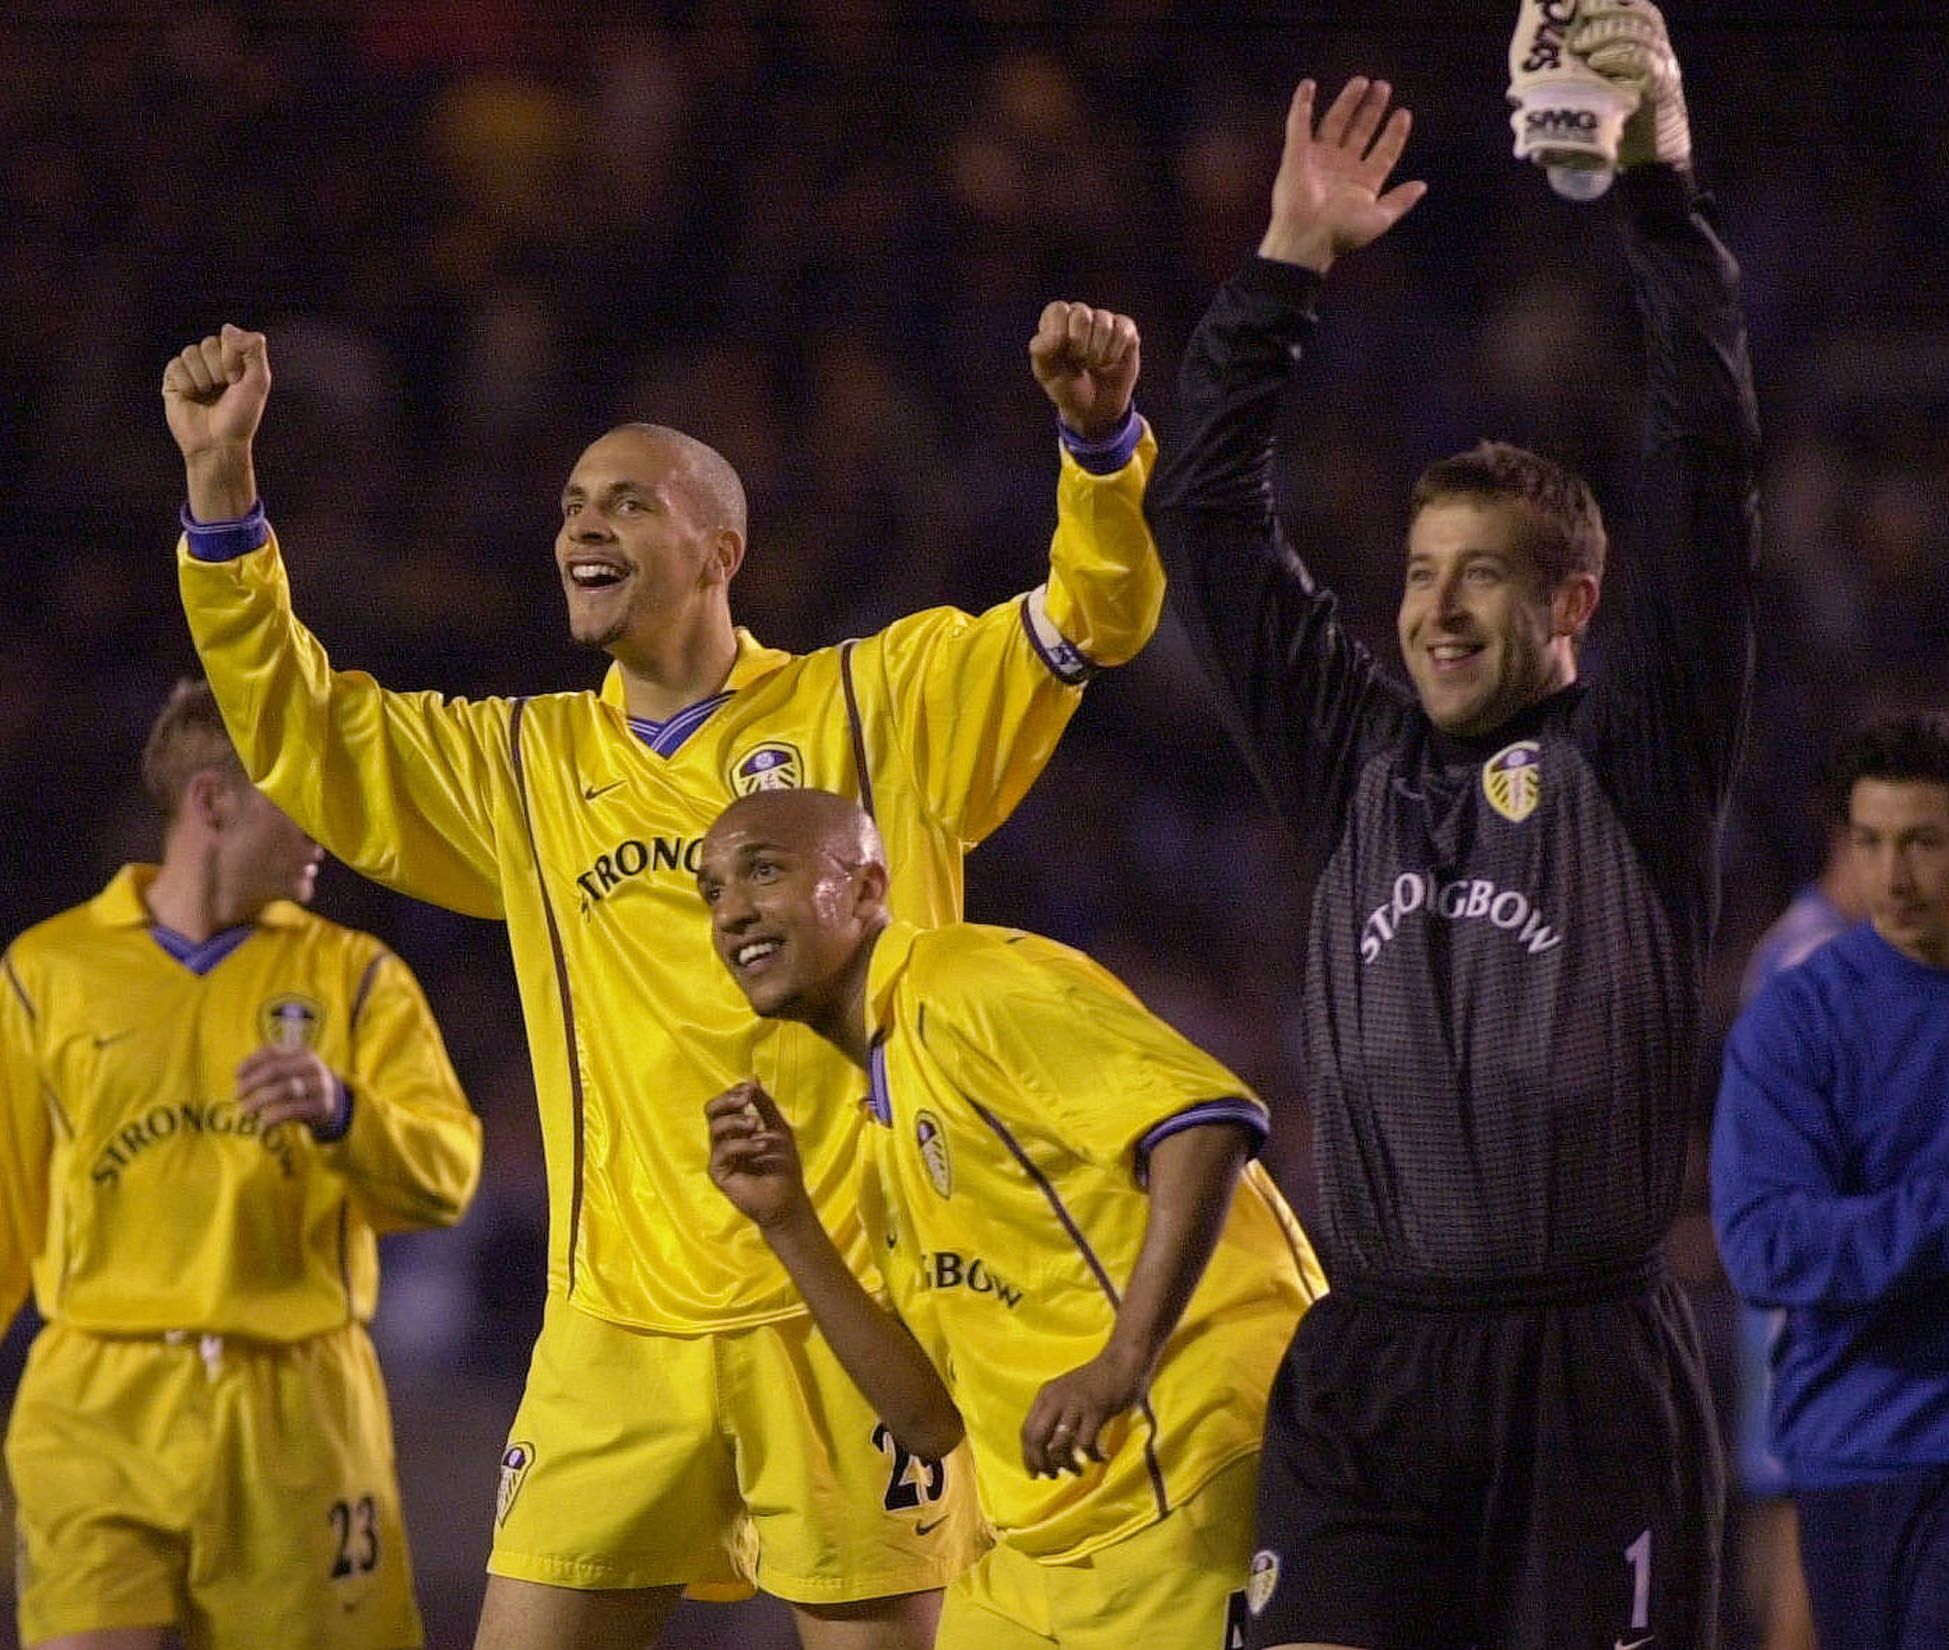 Leeds United's Rio Ferdinand (L) Olivier Dacourt (C) and goalkeeper Nigel Martyn celebrate after their match against Deportivo La Coruna in the Champions League quarter-final at the Estadio Municipal De Riazor April 17, 2001. Leeds United lost the match 2-0 but advanced to the Champions League semifinal with a 3-2 aggrigate win over Deportivo Coruna.

DC/AA